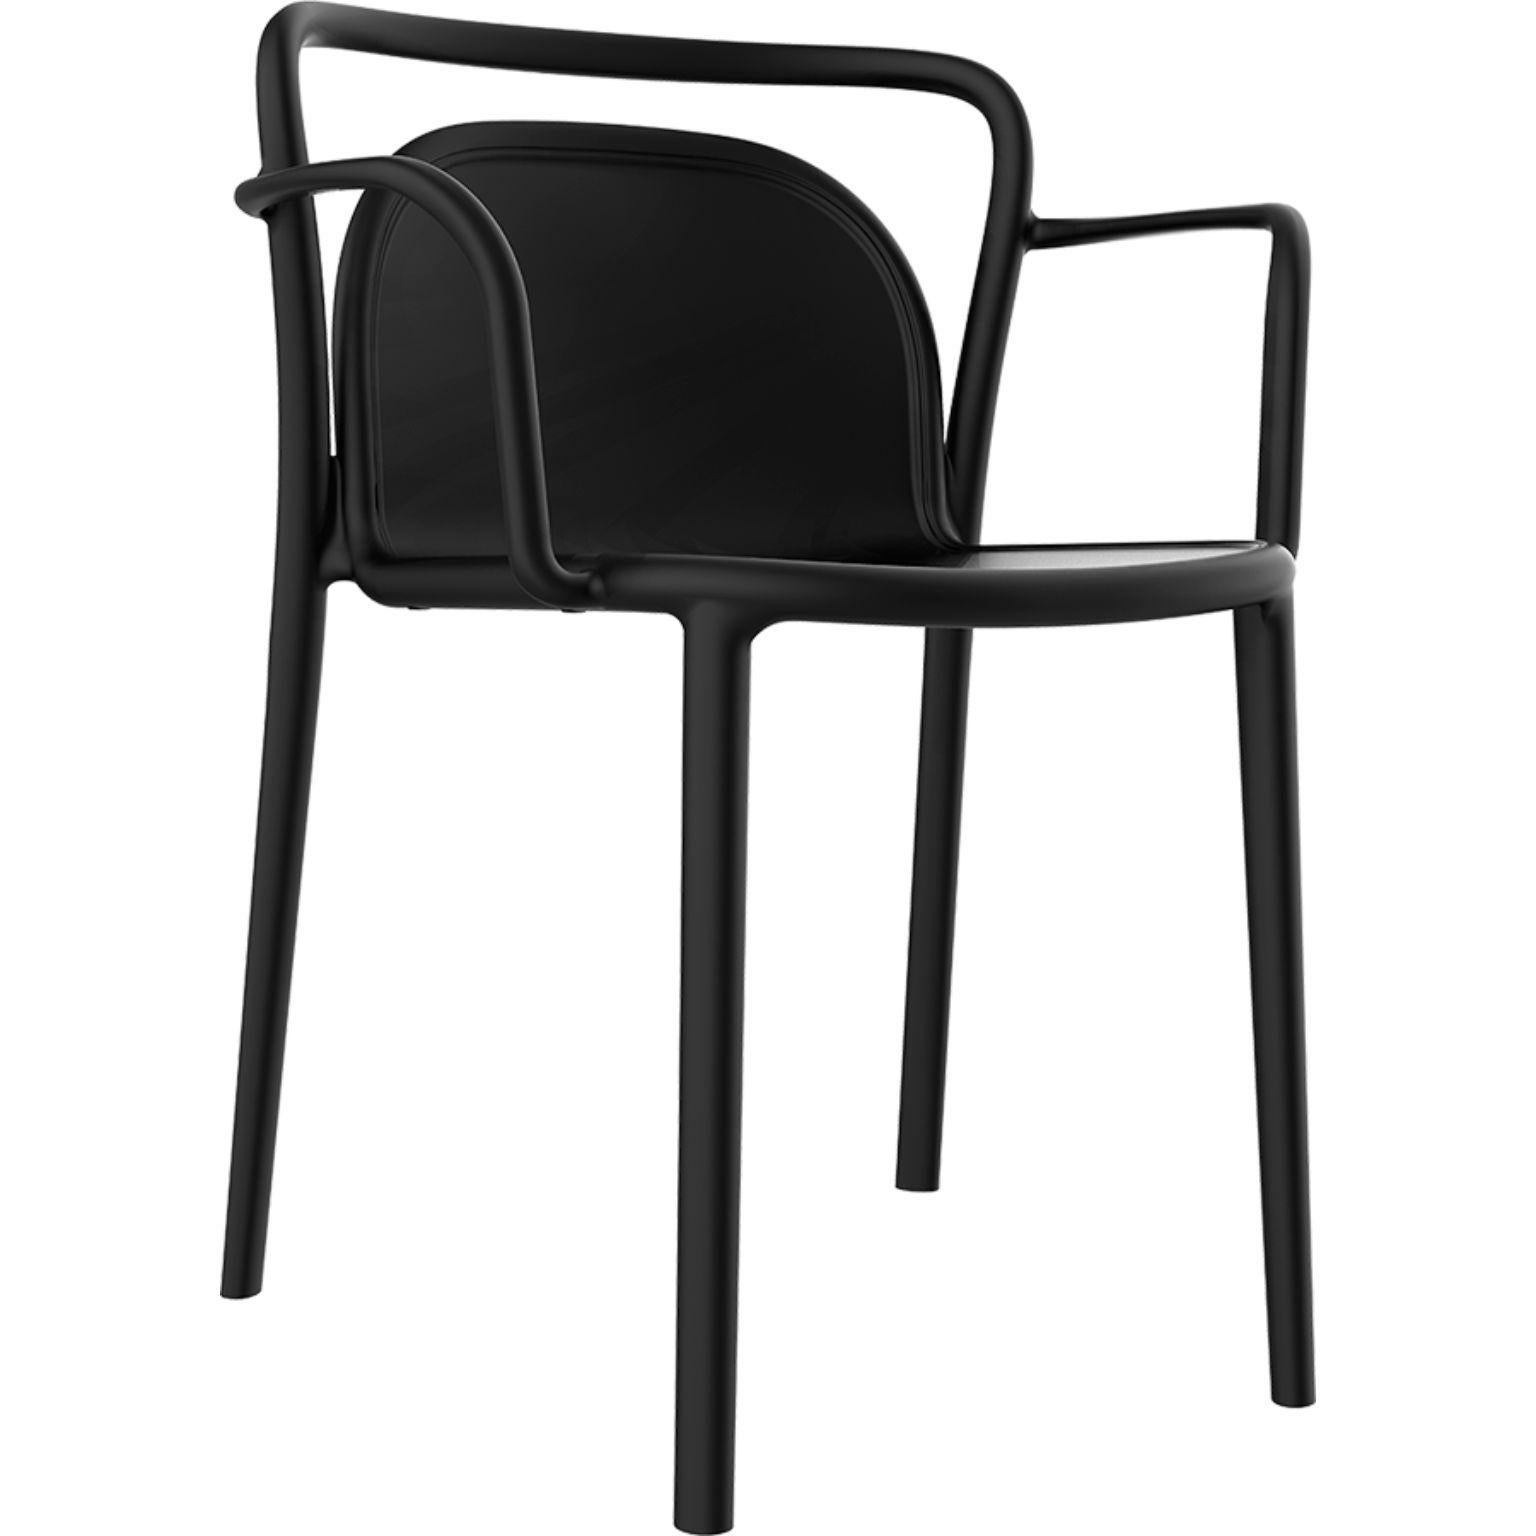 Set of 4 classe black chairs by MOWEE
Dimensions: D52 x W52 x H77 cm (Seat Height 45 cm)
Material: Polypropylene resin with fiberglass.
Weight: 4.6 kg
Also available in different colors. An optional cushion can be added. 

Classe is a chair